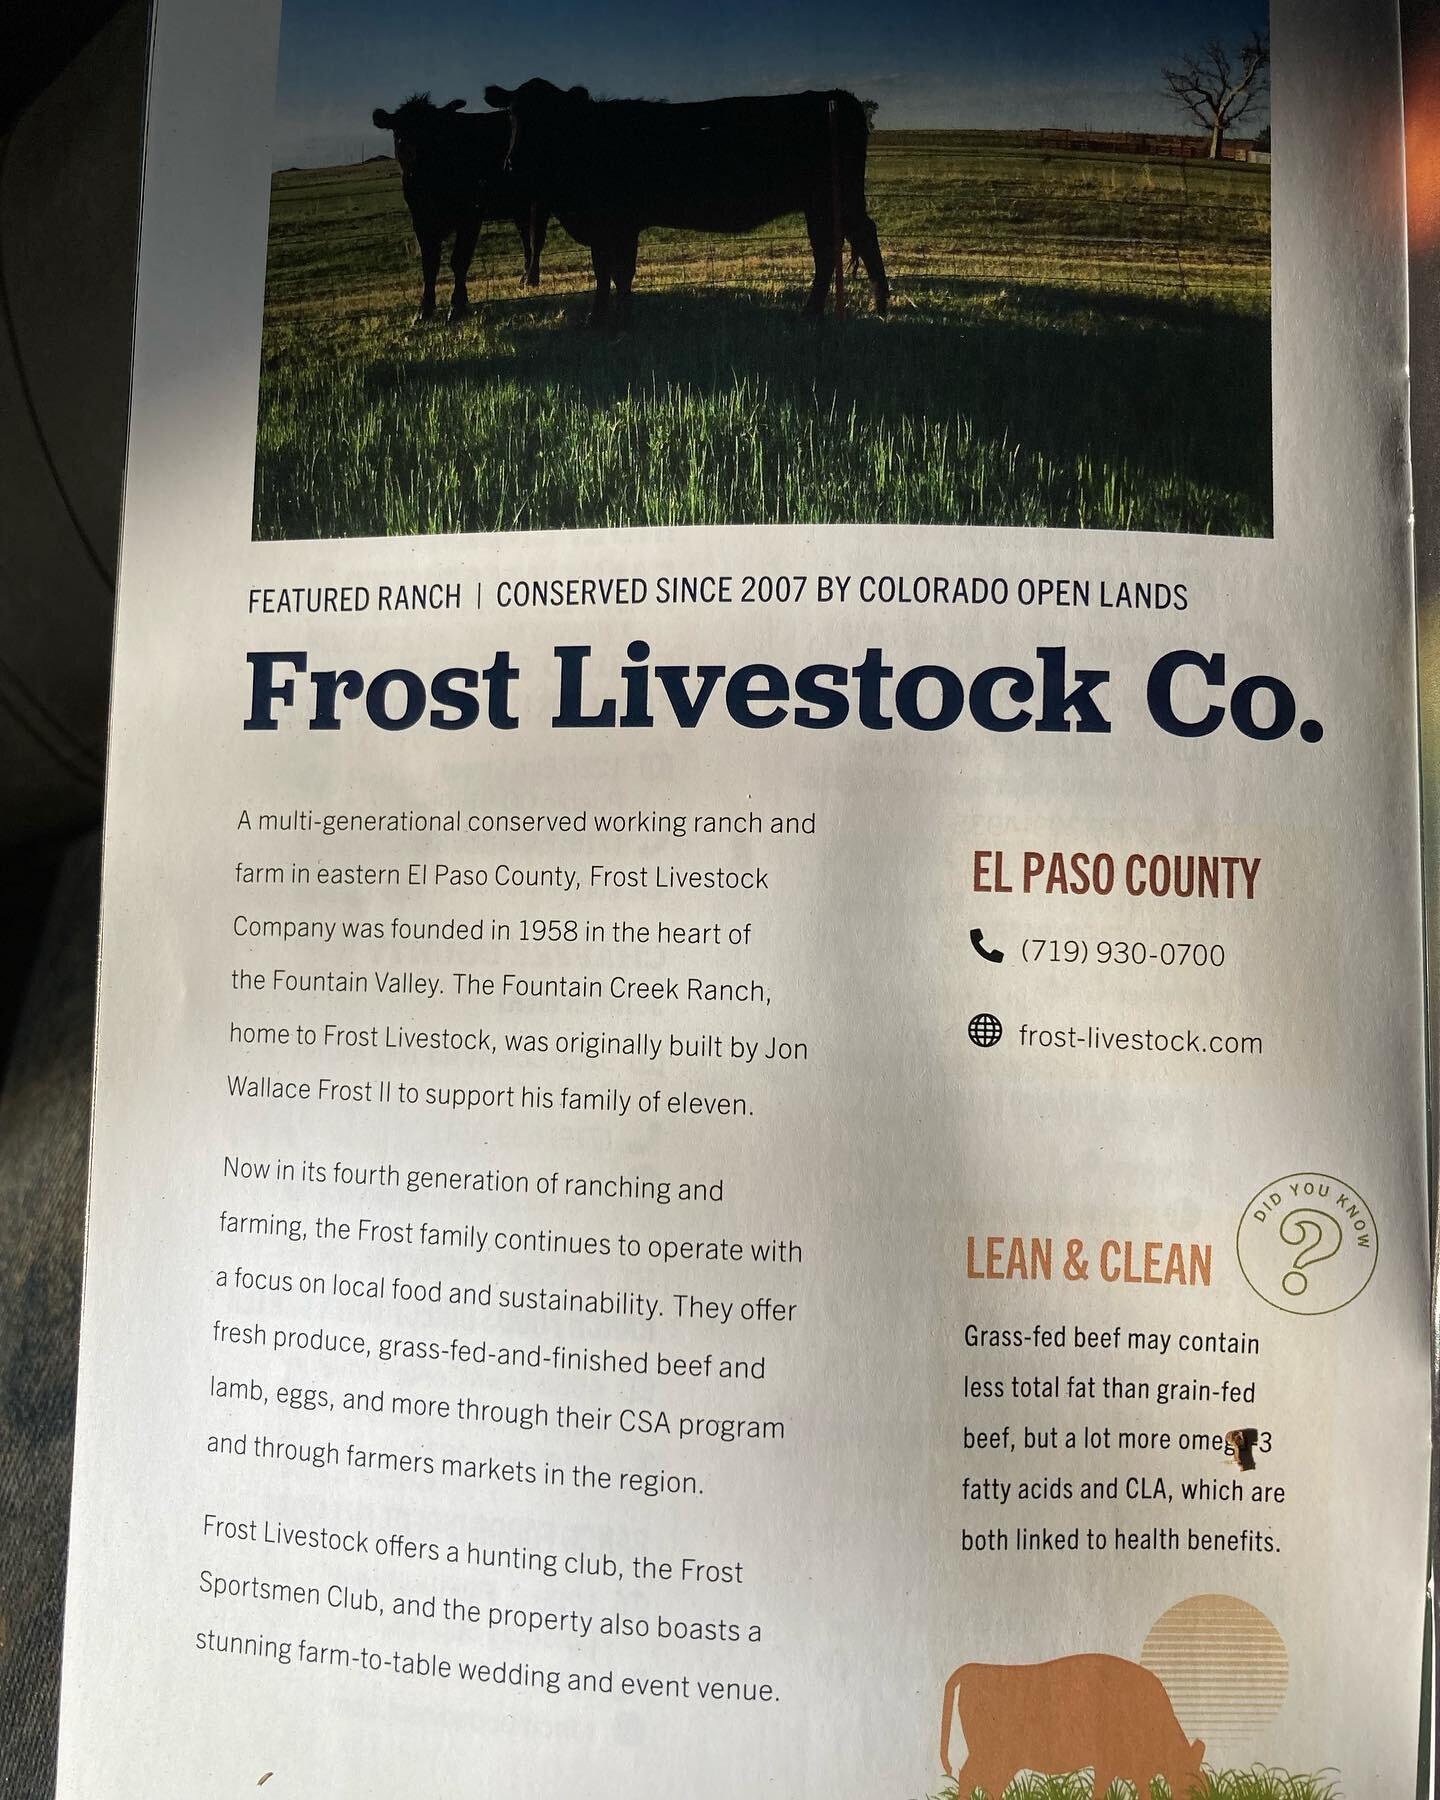 A little behind on getting this posted but still awesome to be one of the featured farms/ranches for @palmerlandco. Land and water conservation, holistic agriculture, and local food production are aspects of the ag industry that we hold dear in our o